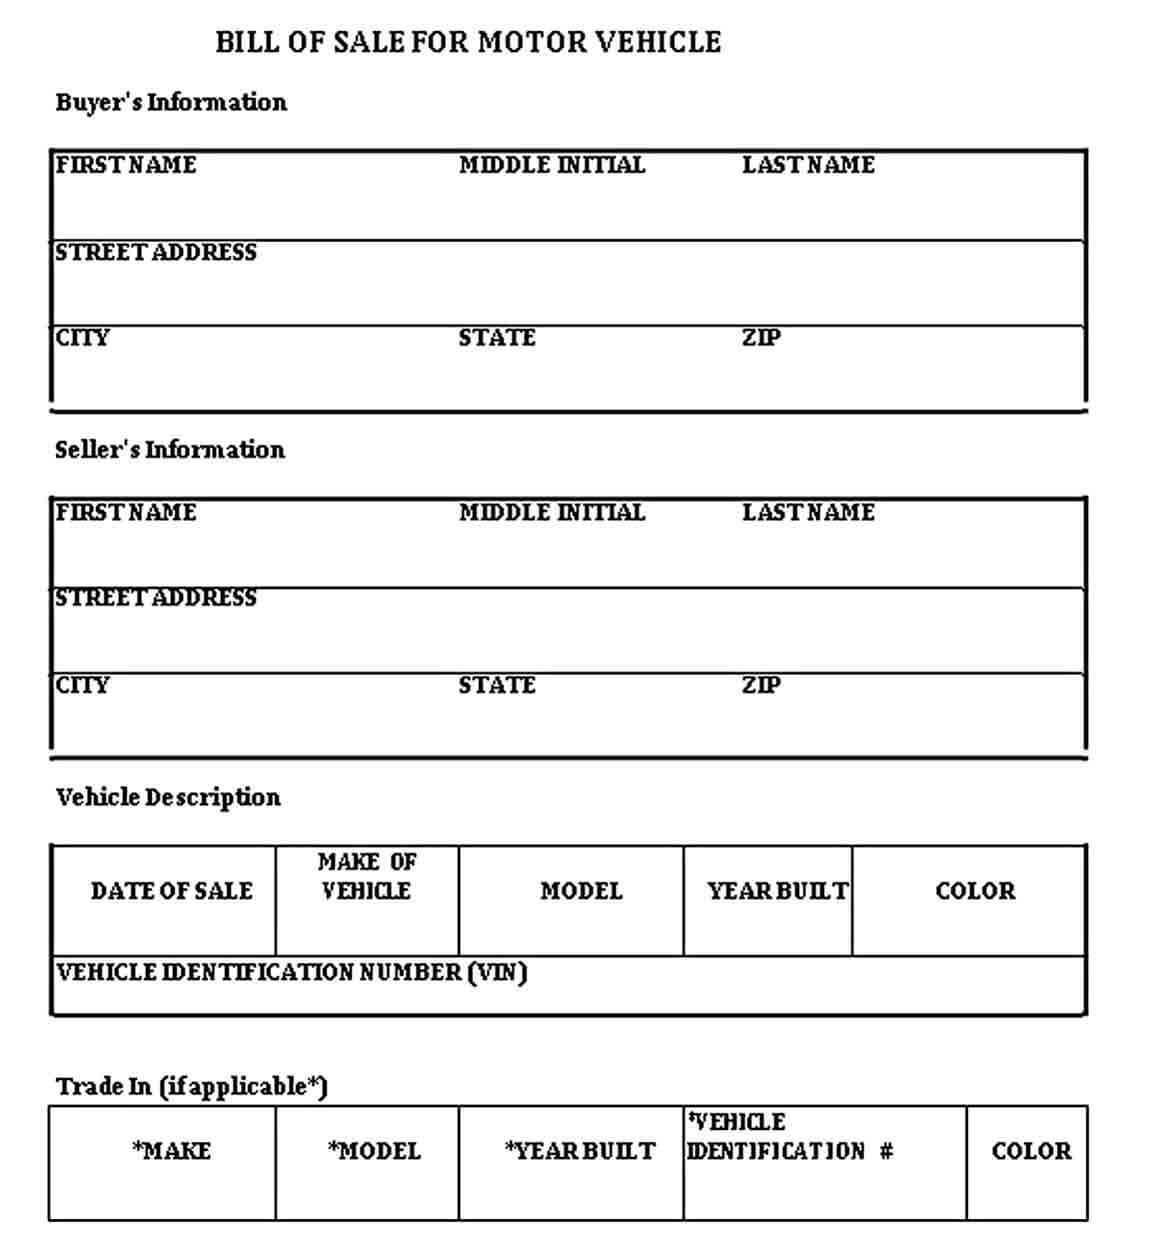 vehicle bill of sale template